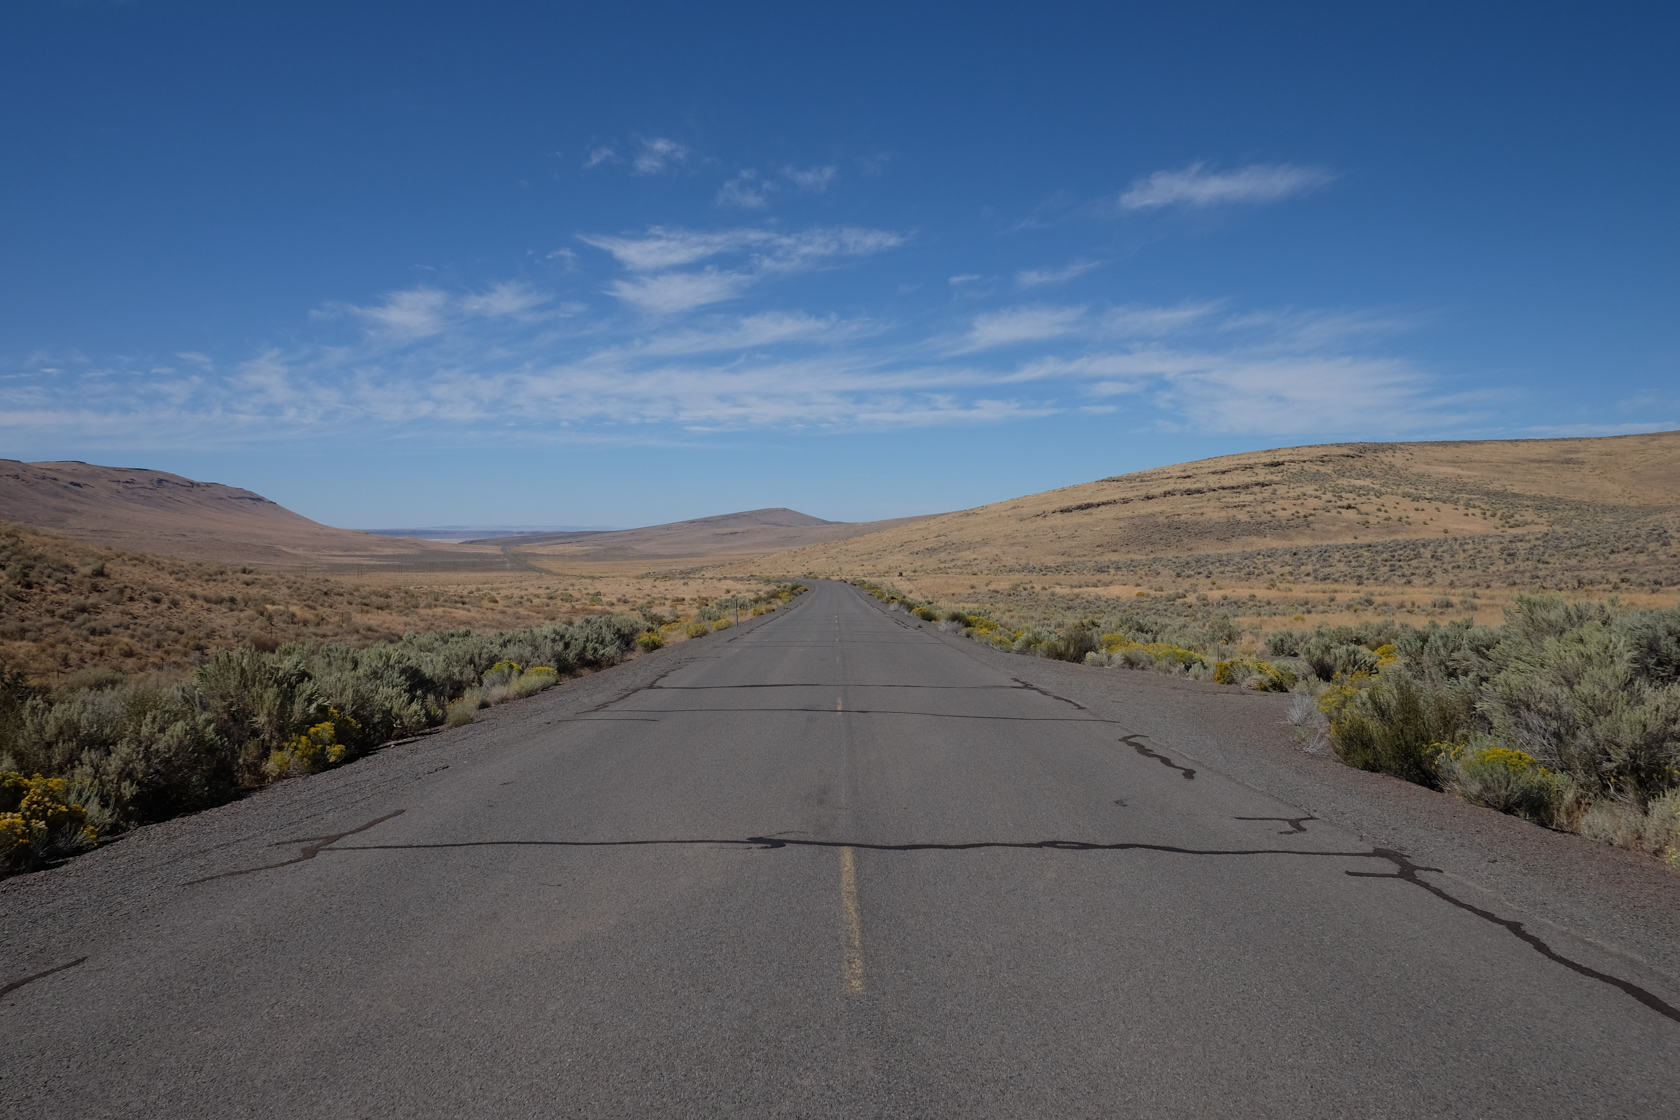 On the way from Frenchglen to Fields, I had to stop and take a picture of the long, empty highway. It was hard to imagine that we were still in Oregon.